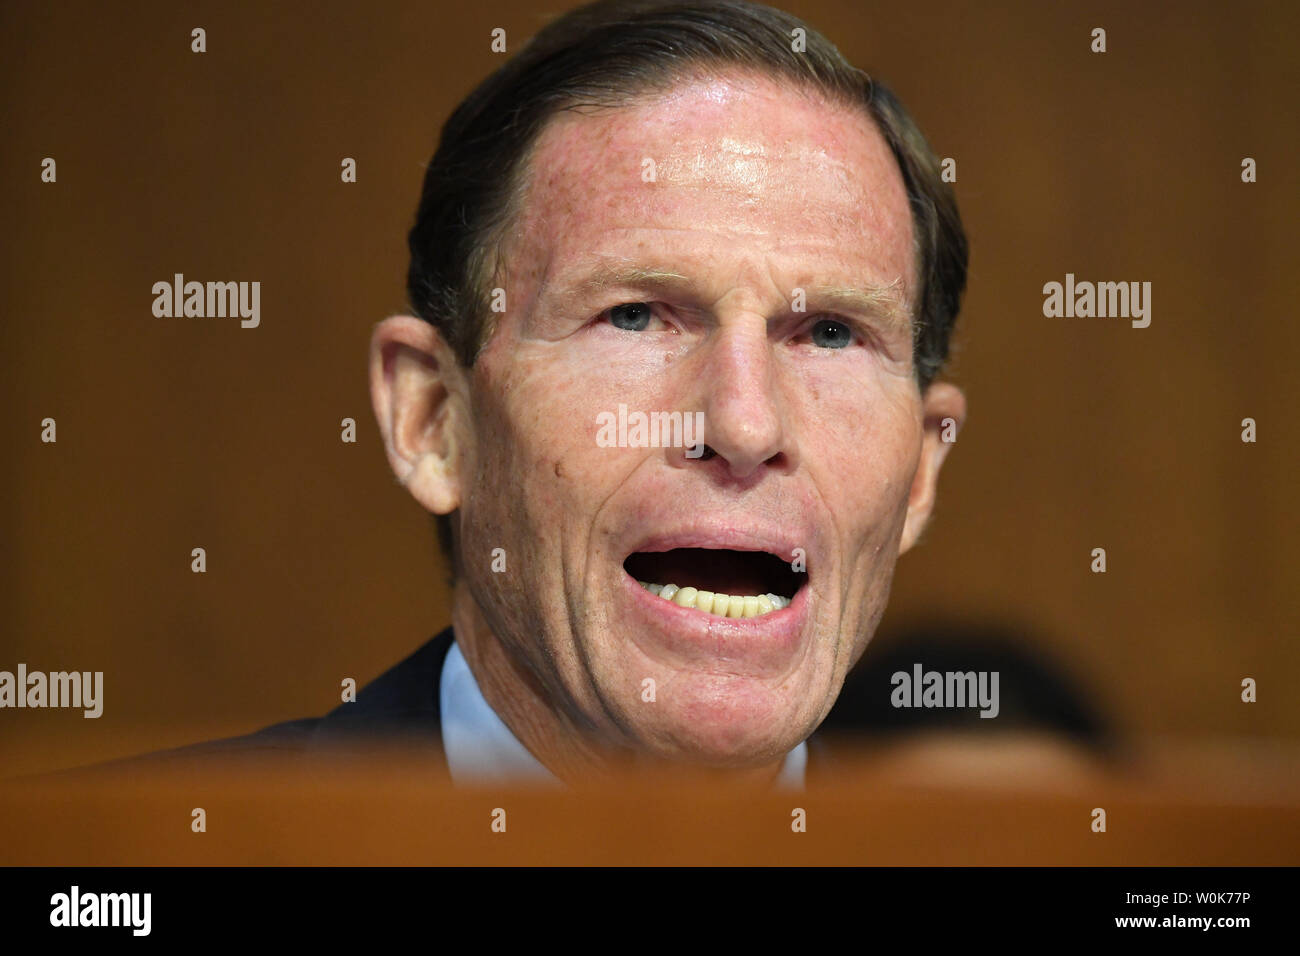 Sen. Richard Blumenthal, D-Conn., delivers his opening statement during the Judiciary Committee confirmation hearing for Supreme Court Justice nominee Brett M. Kavanaugh on Capitol Hill in Washington, DC on September 4, 2018. Judge Kavanaugh was nominated to fill the seat of Justice Anthony M. Kennedy who announced his retirement in June.  Photo by Pat Benic/UPI Stock Photo